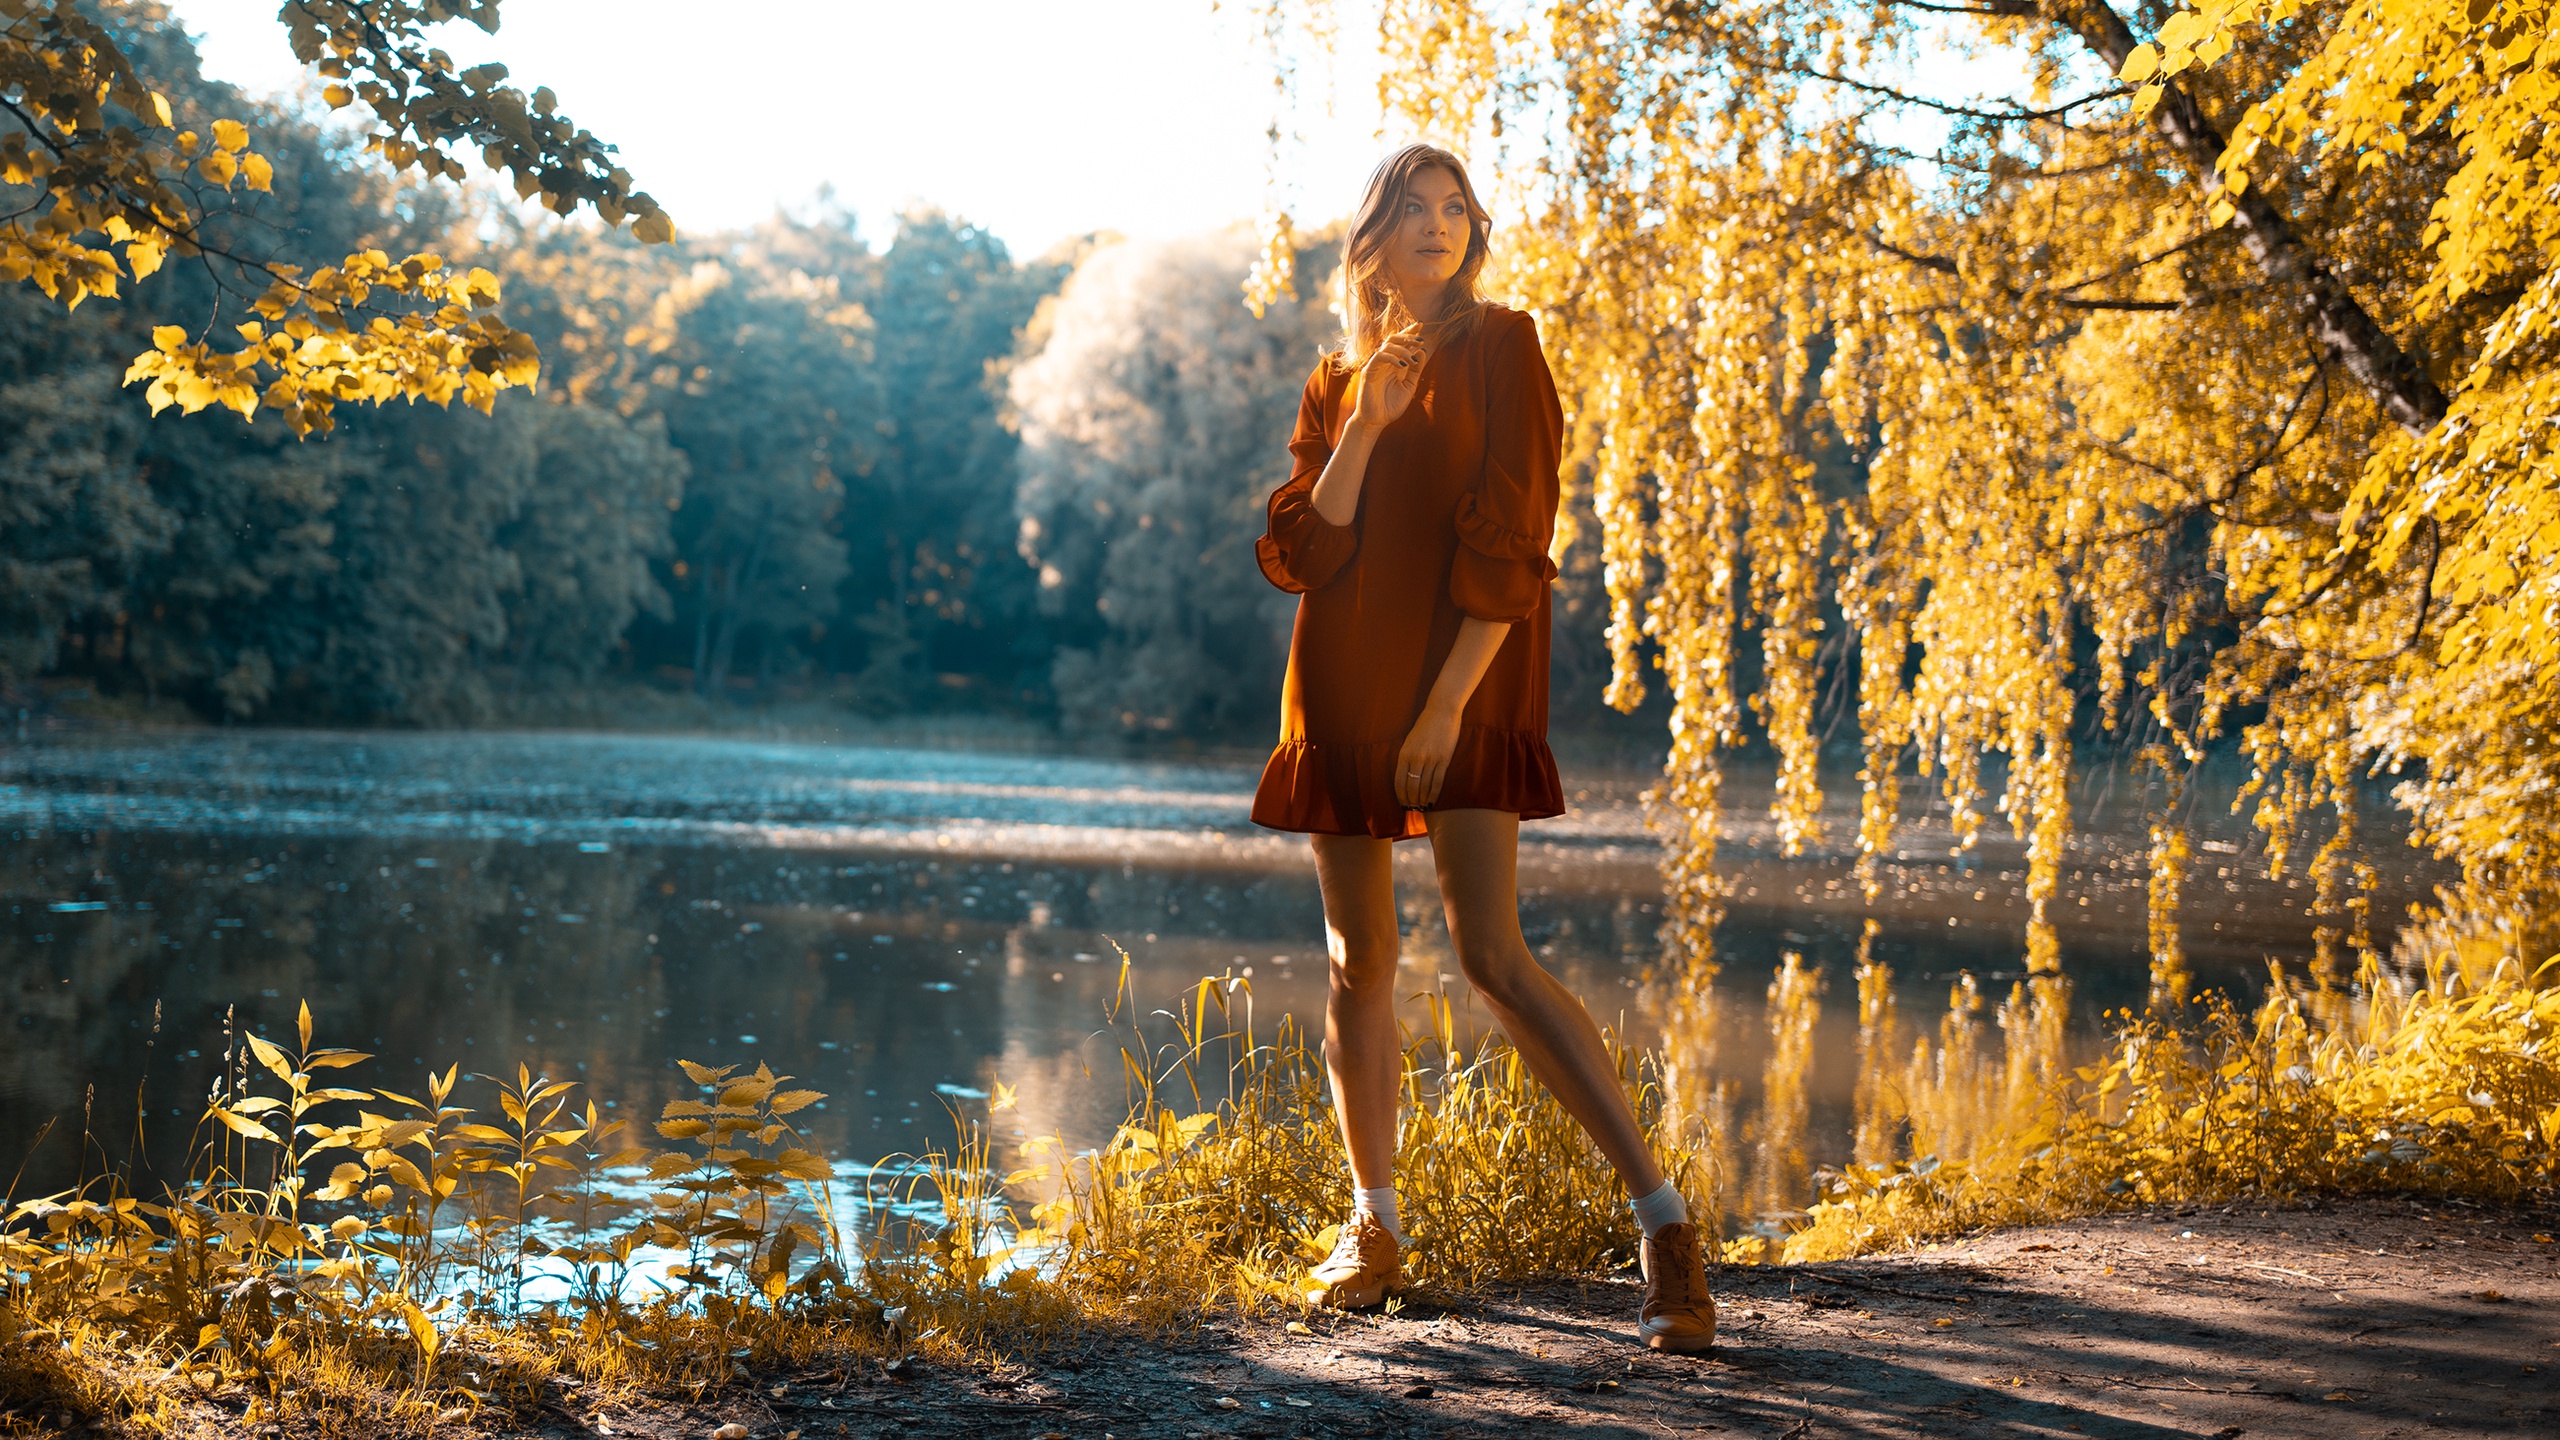 Women Model Vladimir Stefanovich Women Outdoors Trees Fall Water Red Clothing Looking Away Standing  2560x1440